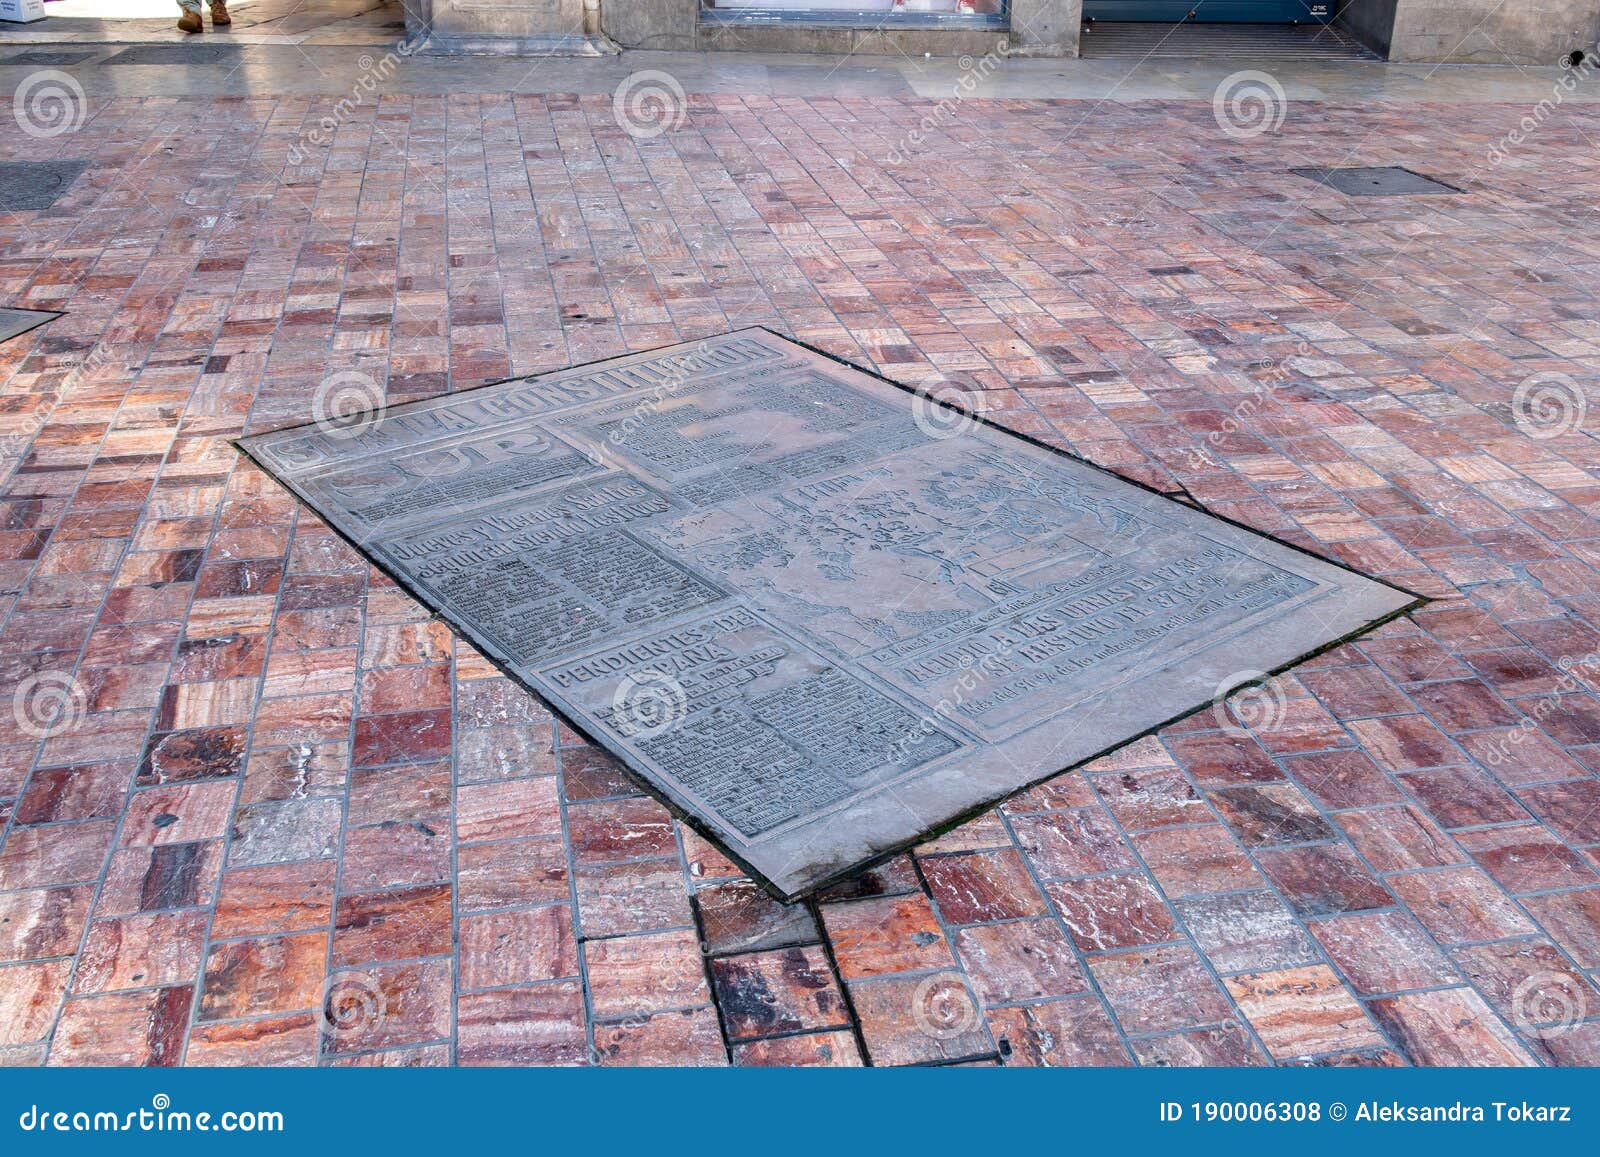 plaza de la constitucion in malaga with old newspaper front page tile panel dated 7 december 1978, spain